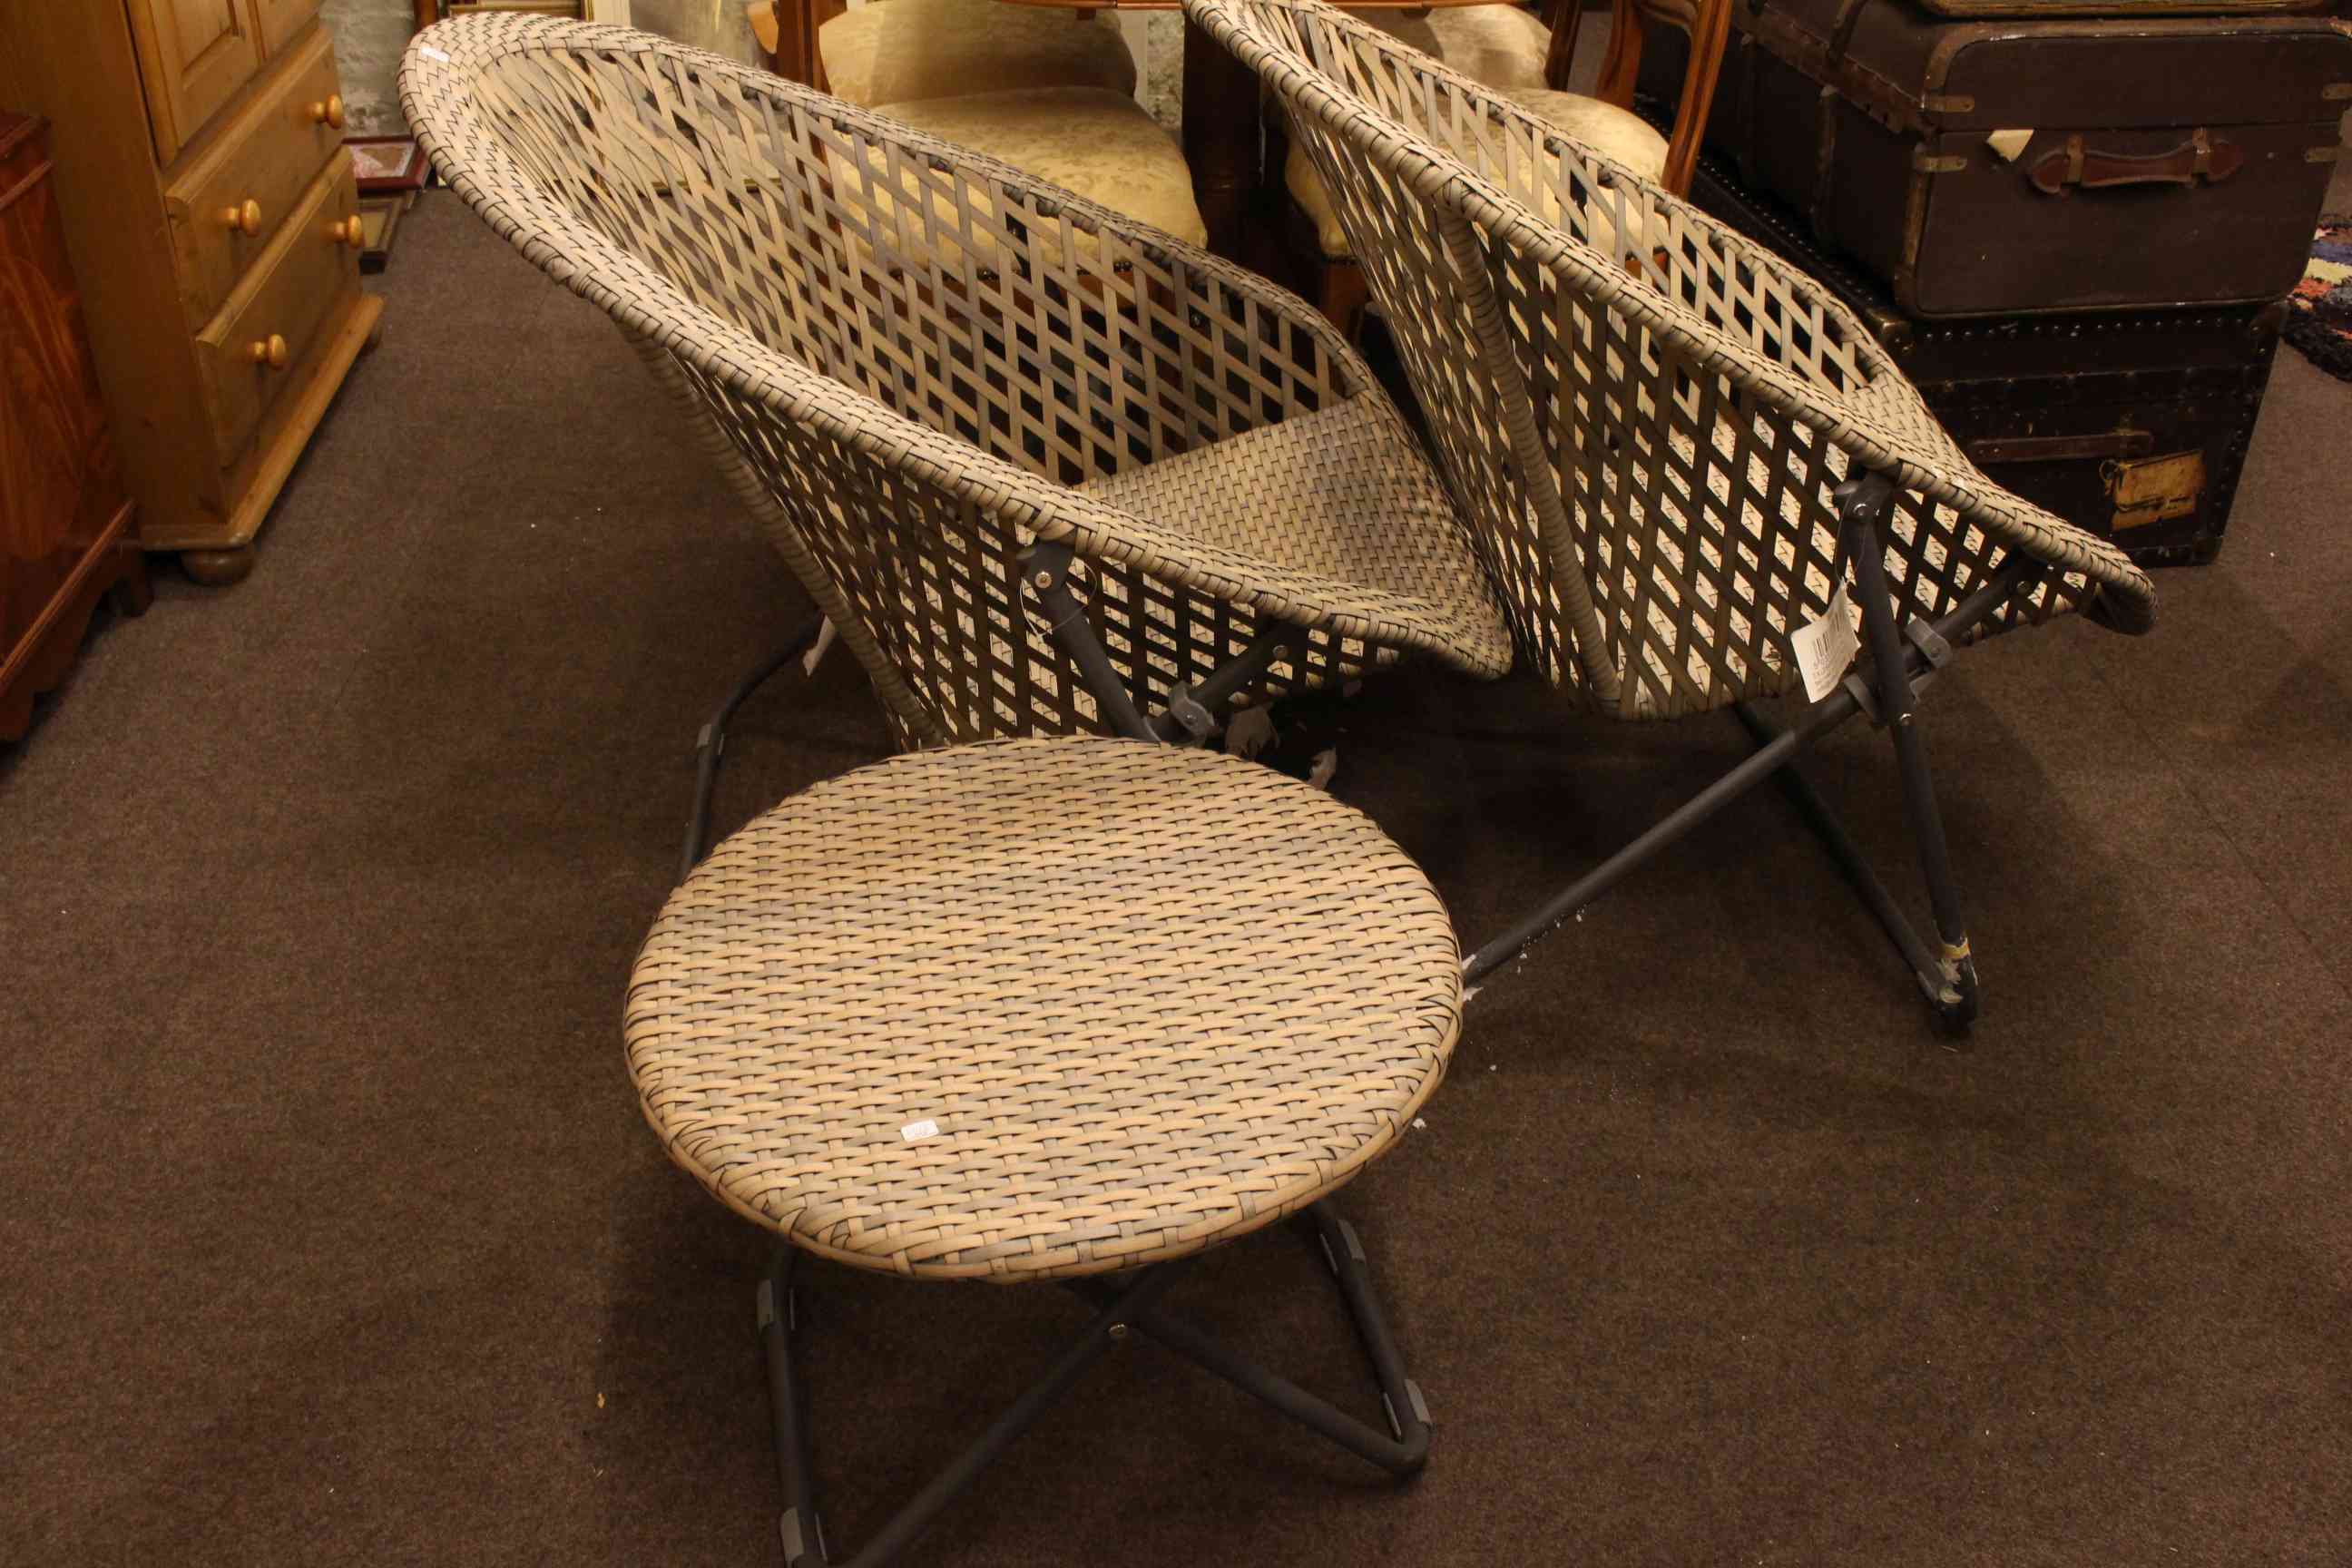 Pair of little used patio chairs and stool.